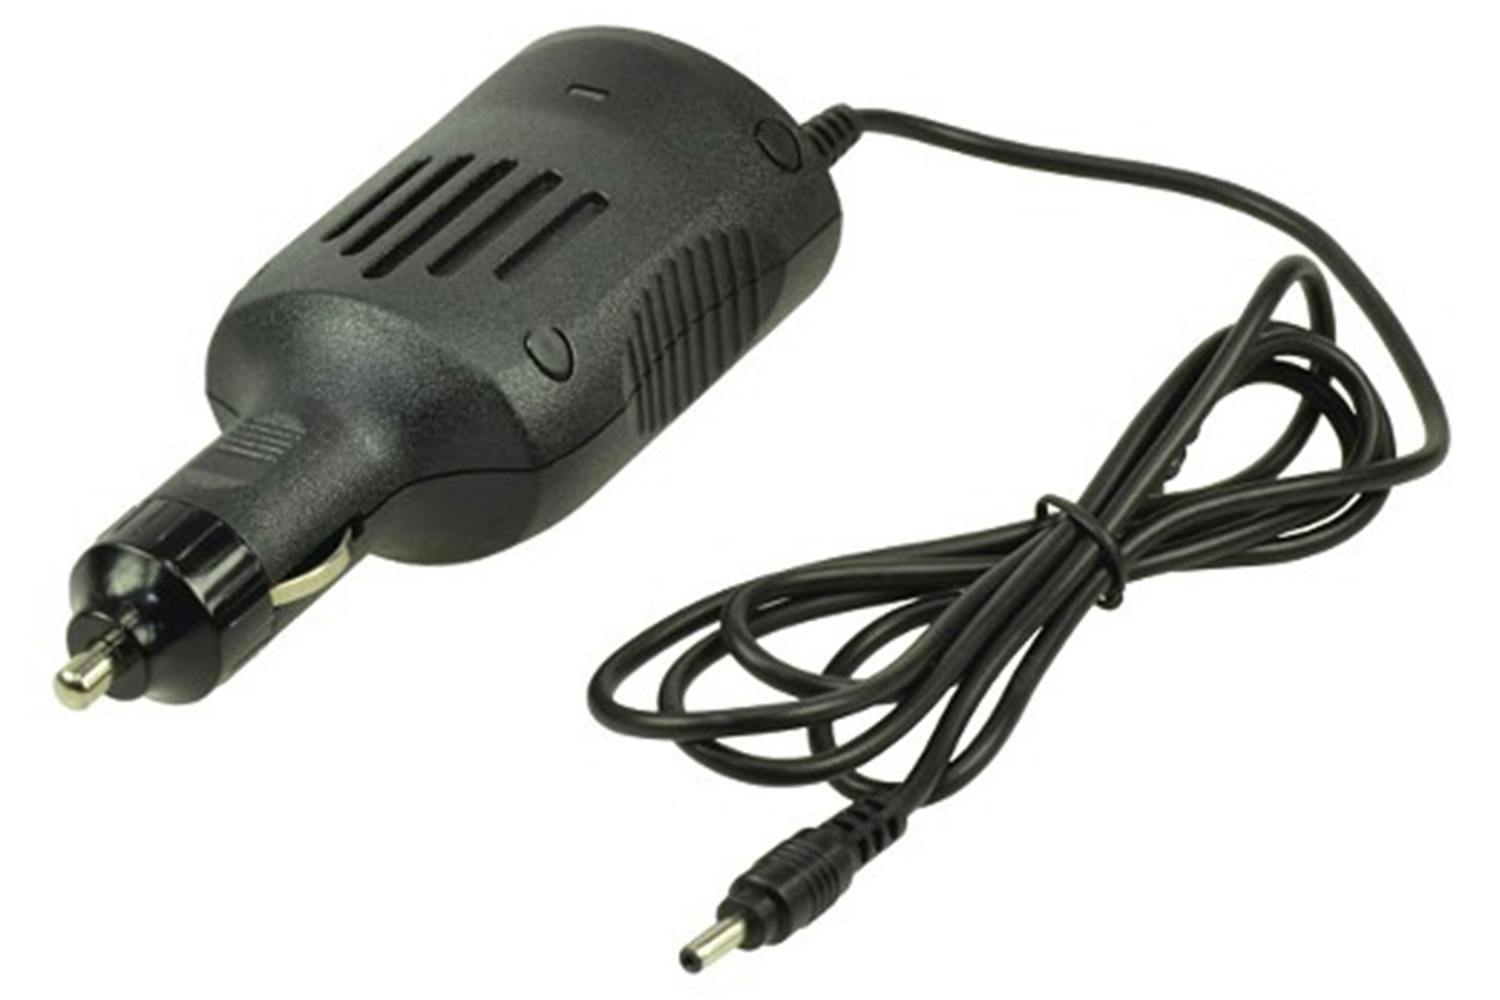 2-Power DC Car Charger 19V 2.1A